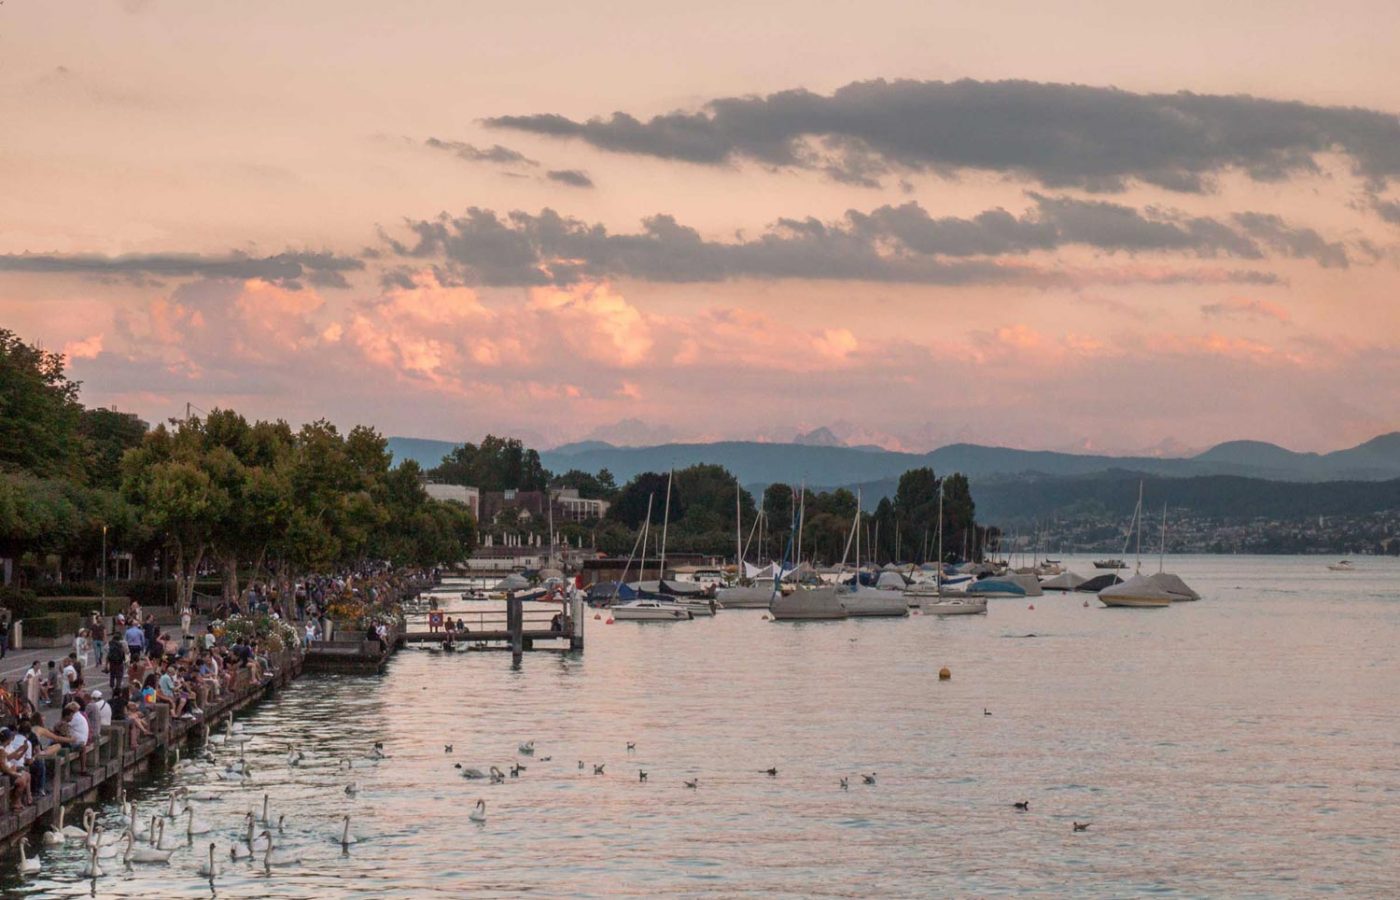 Sustainable City Guide: Things to do in Zurich Switzerland, by Anna Timbook